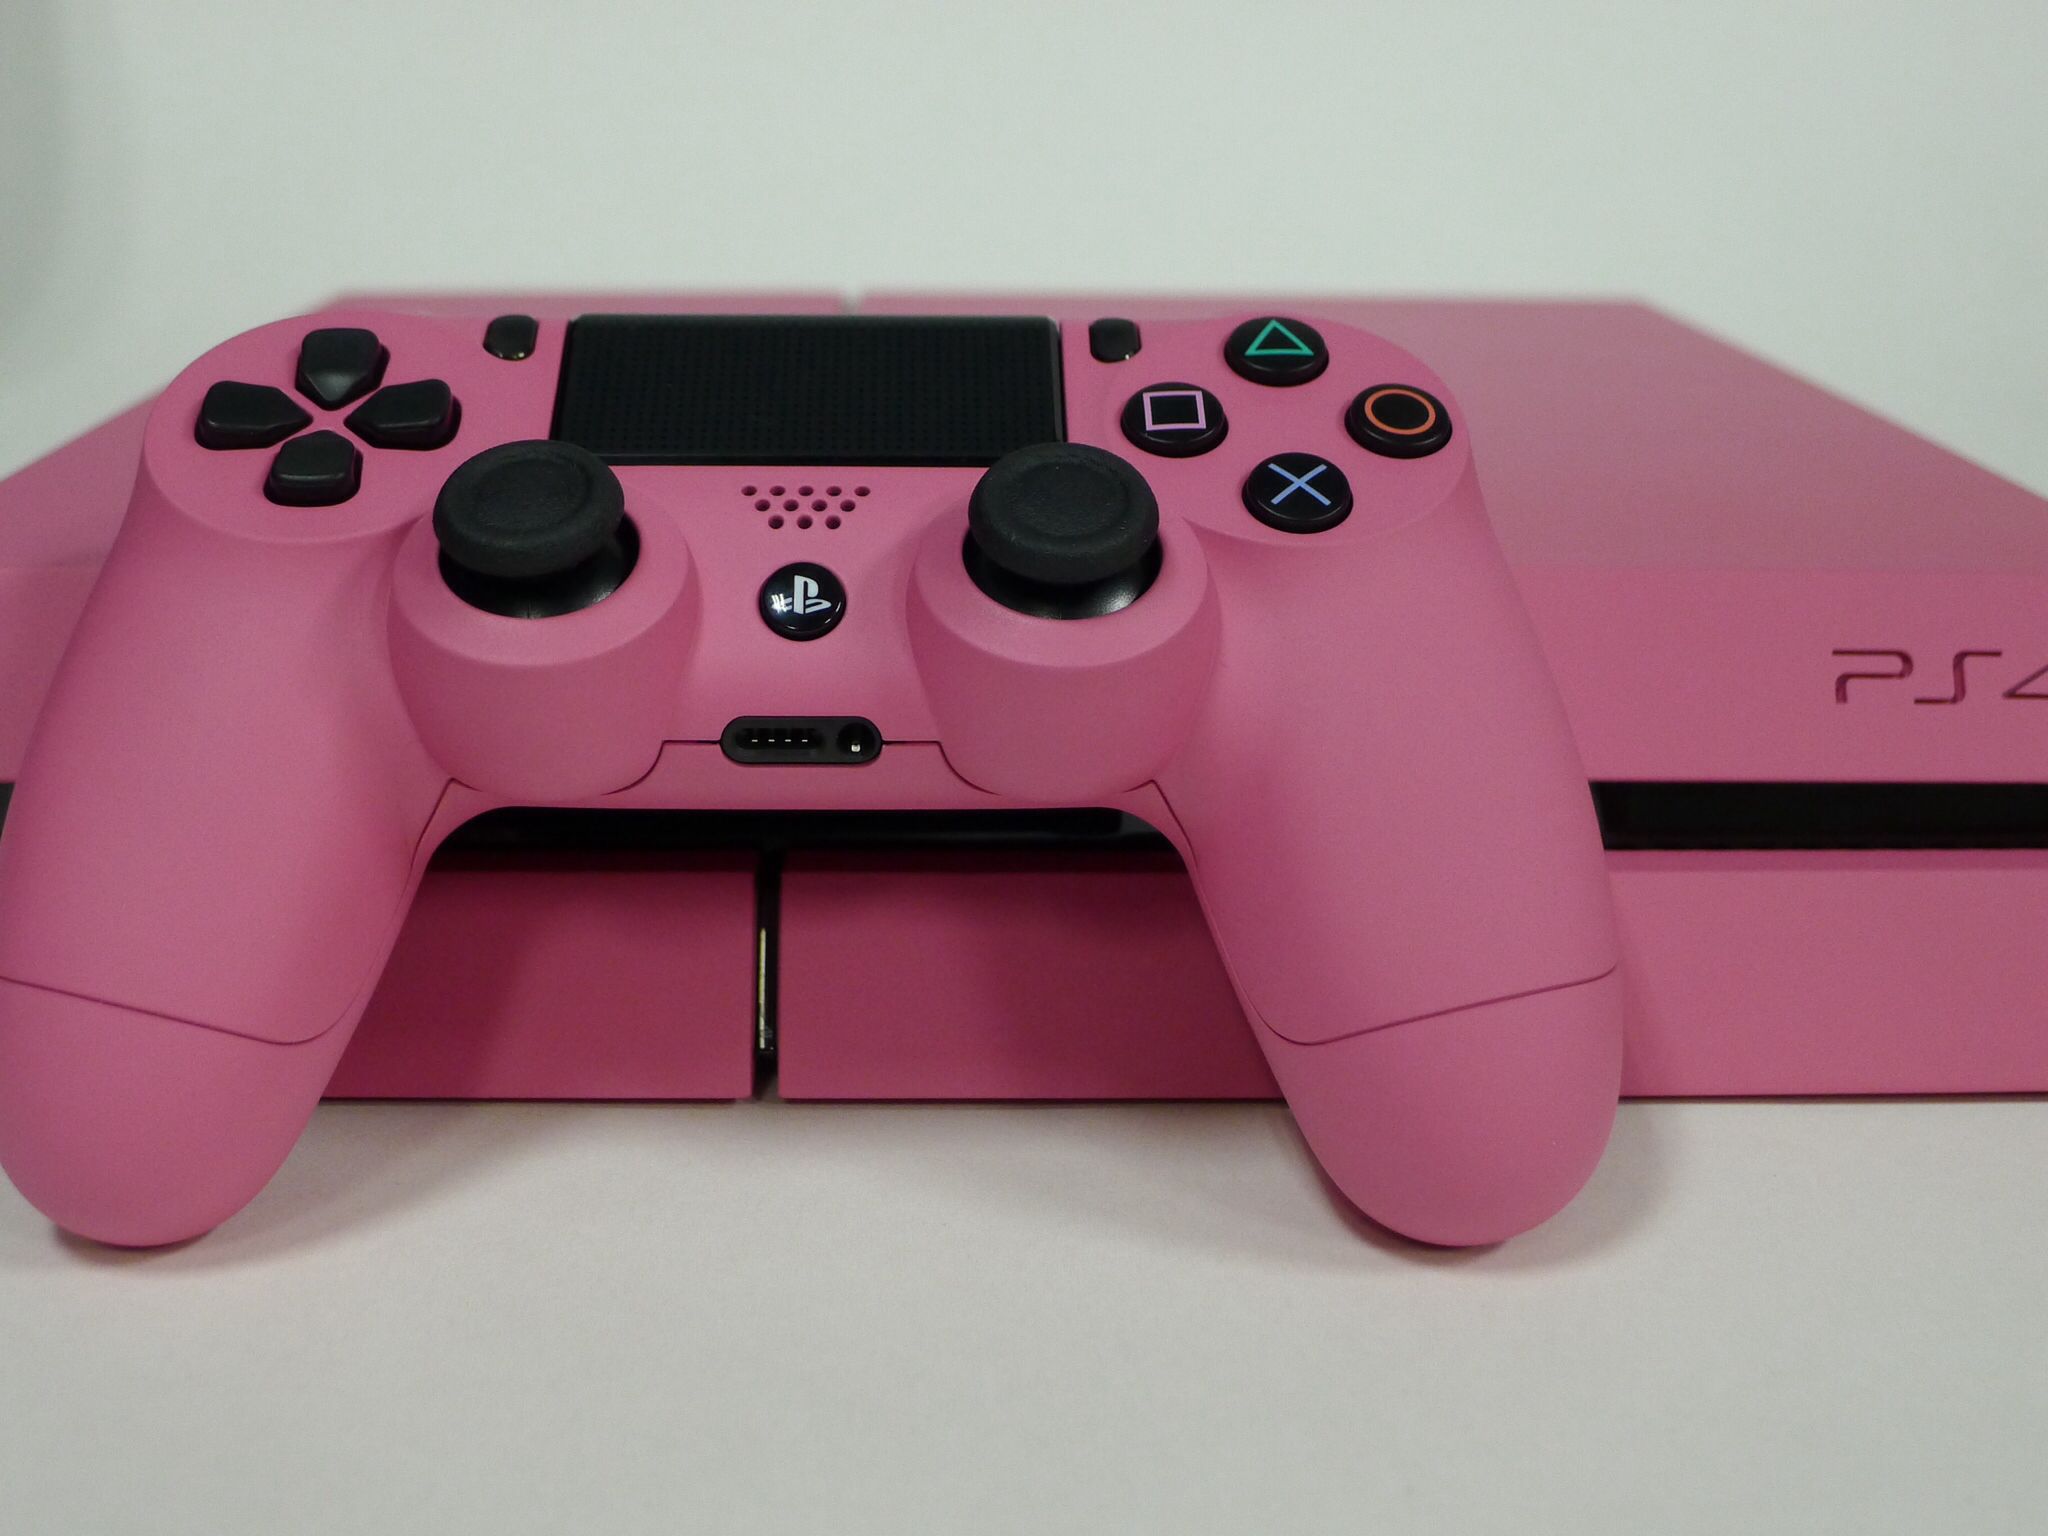 When your favorite color is pink, go all out! #custom #gaming #PS4 #dualshock4 #FlirtPink. Gaming computer, Playstation controller, Ps4 games